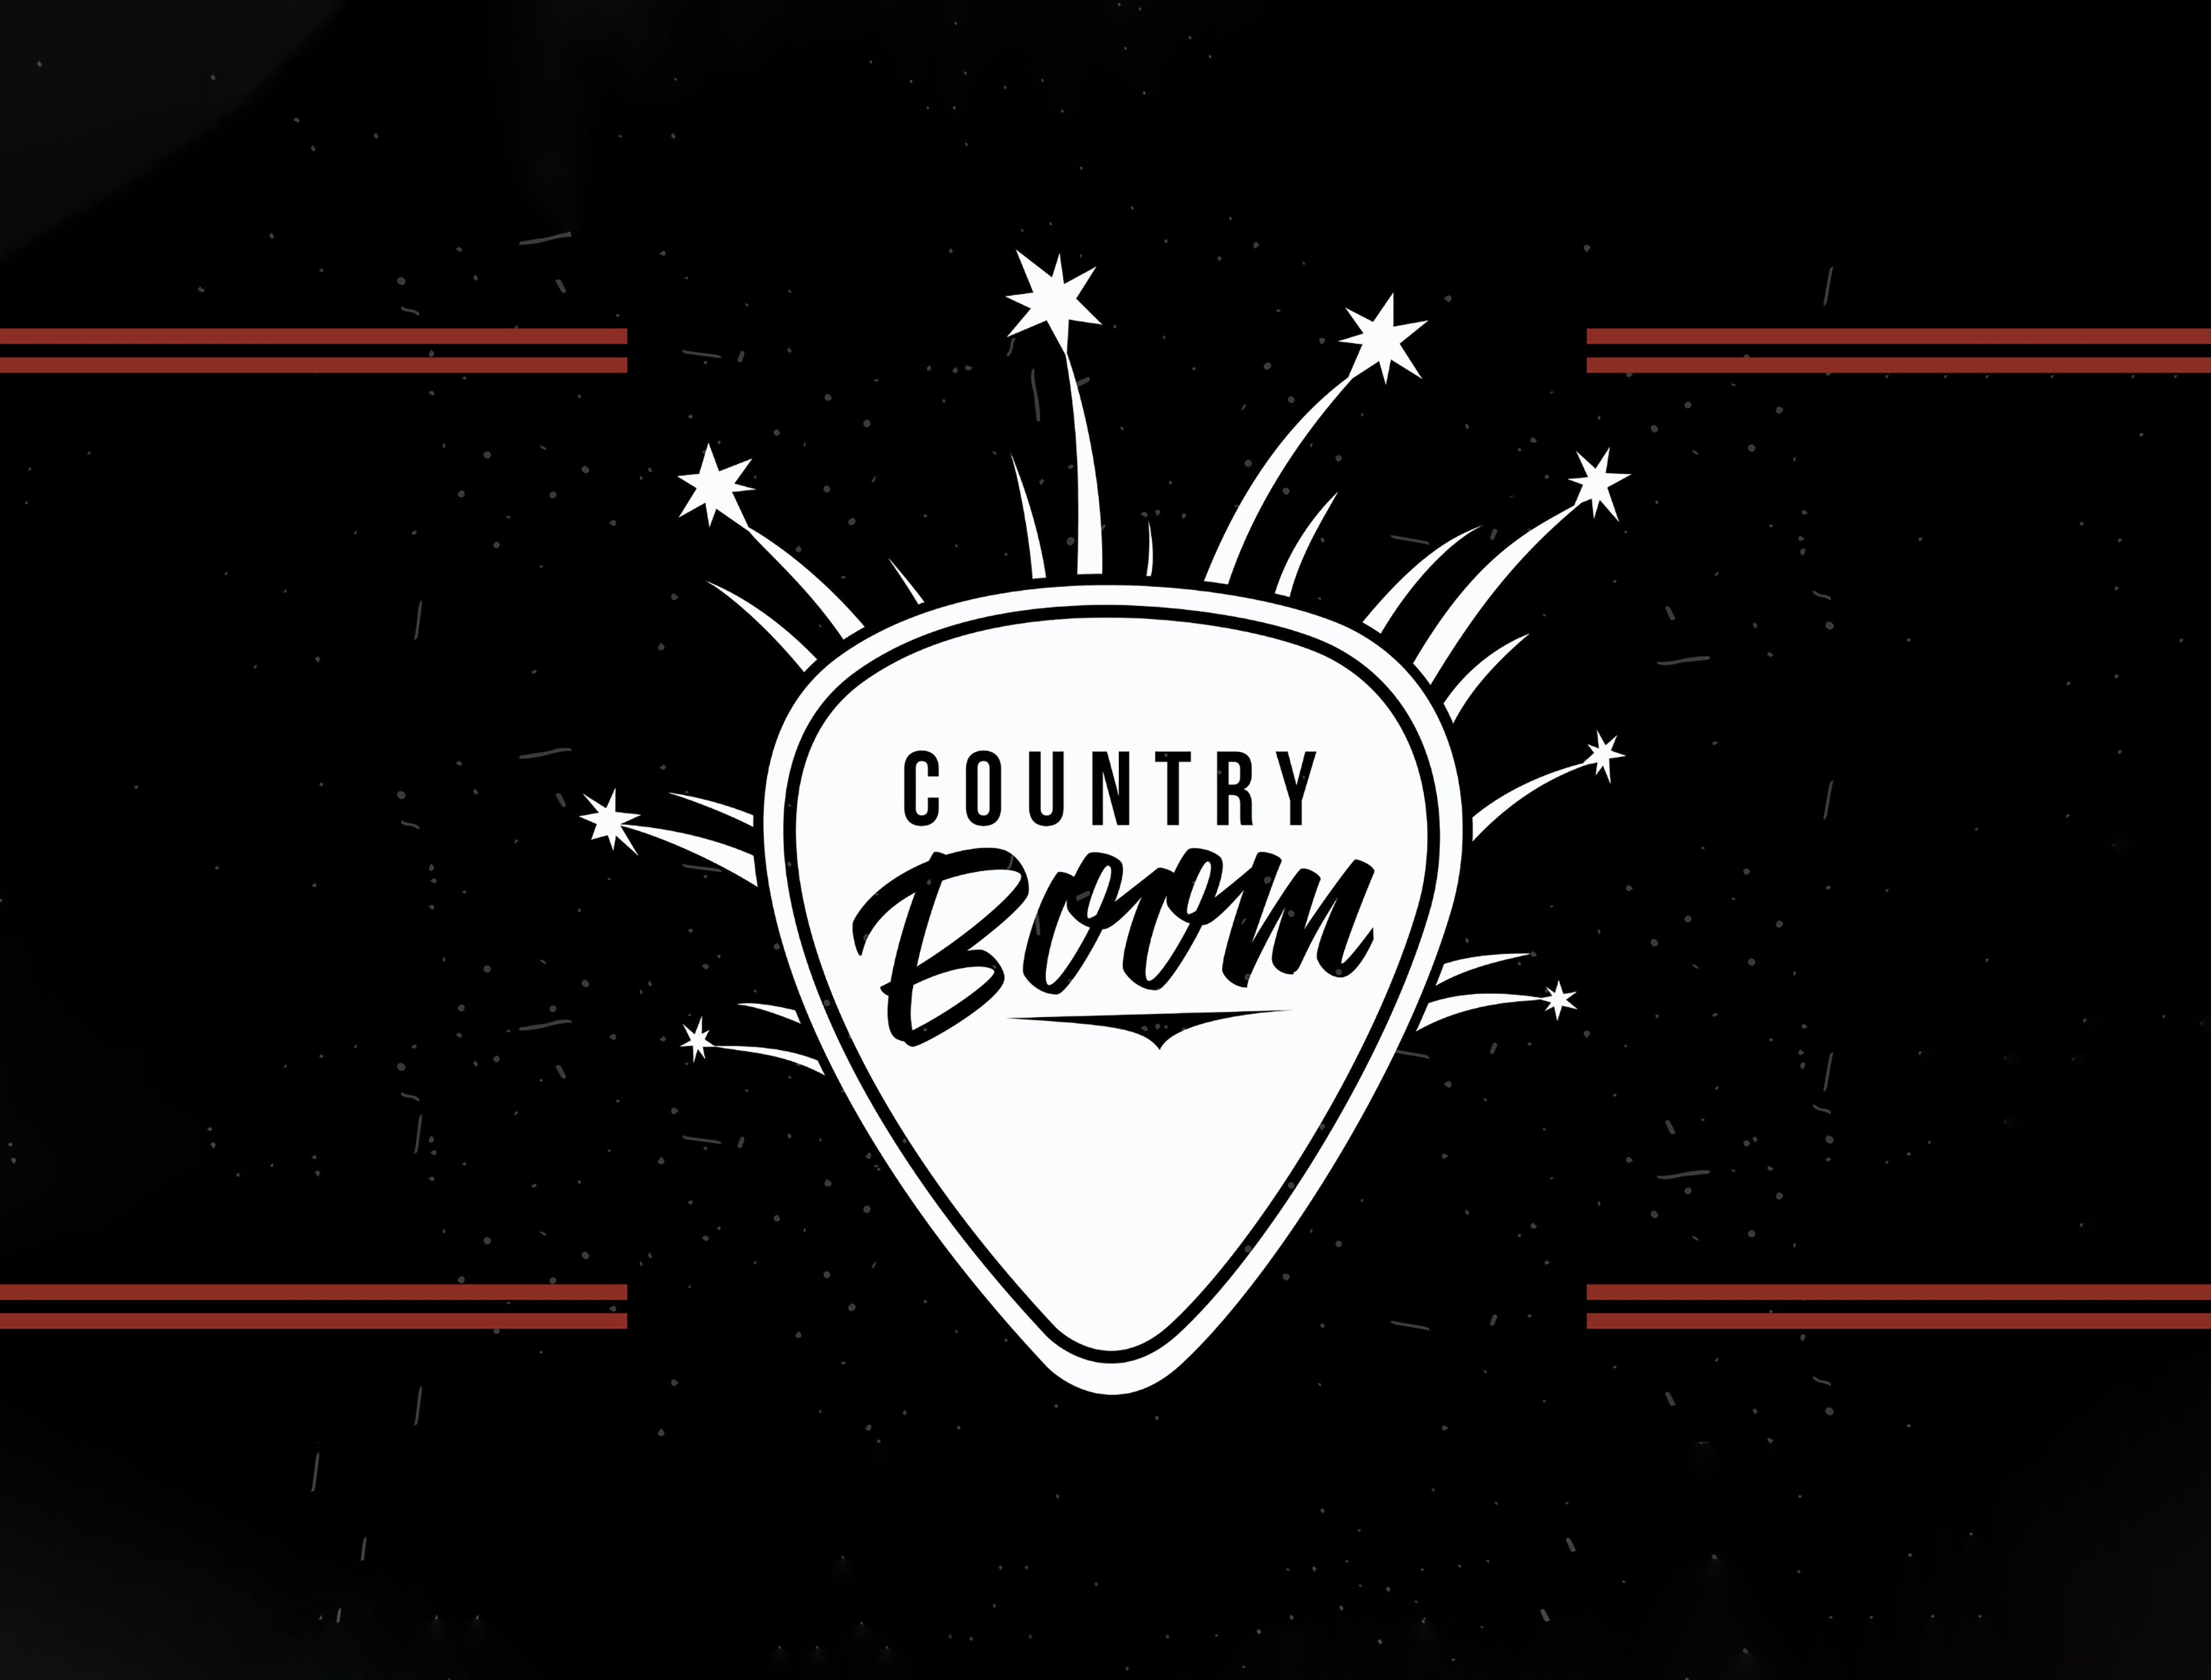 Country Boom Music Festival at Maple Grove Venues